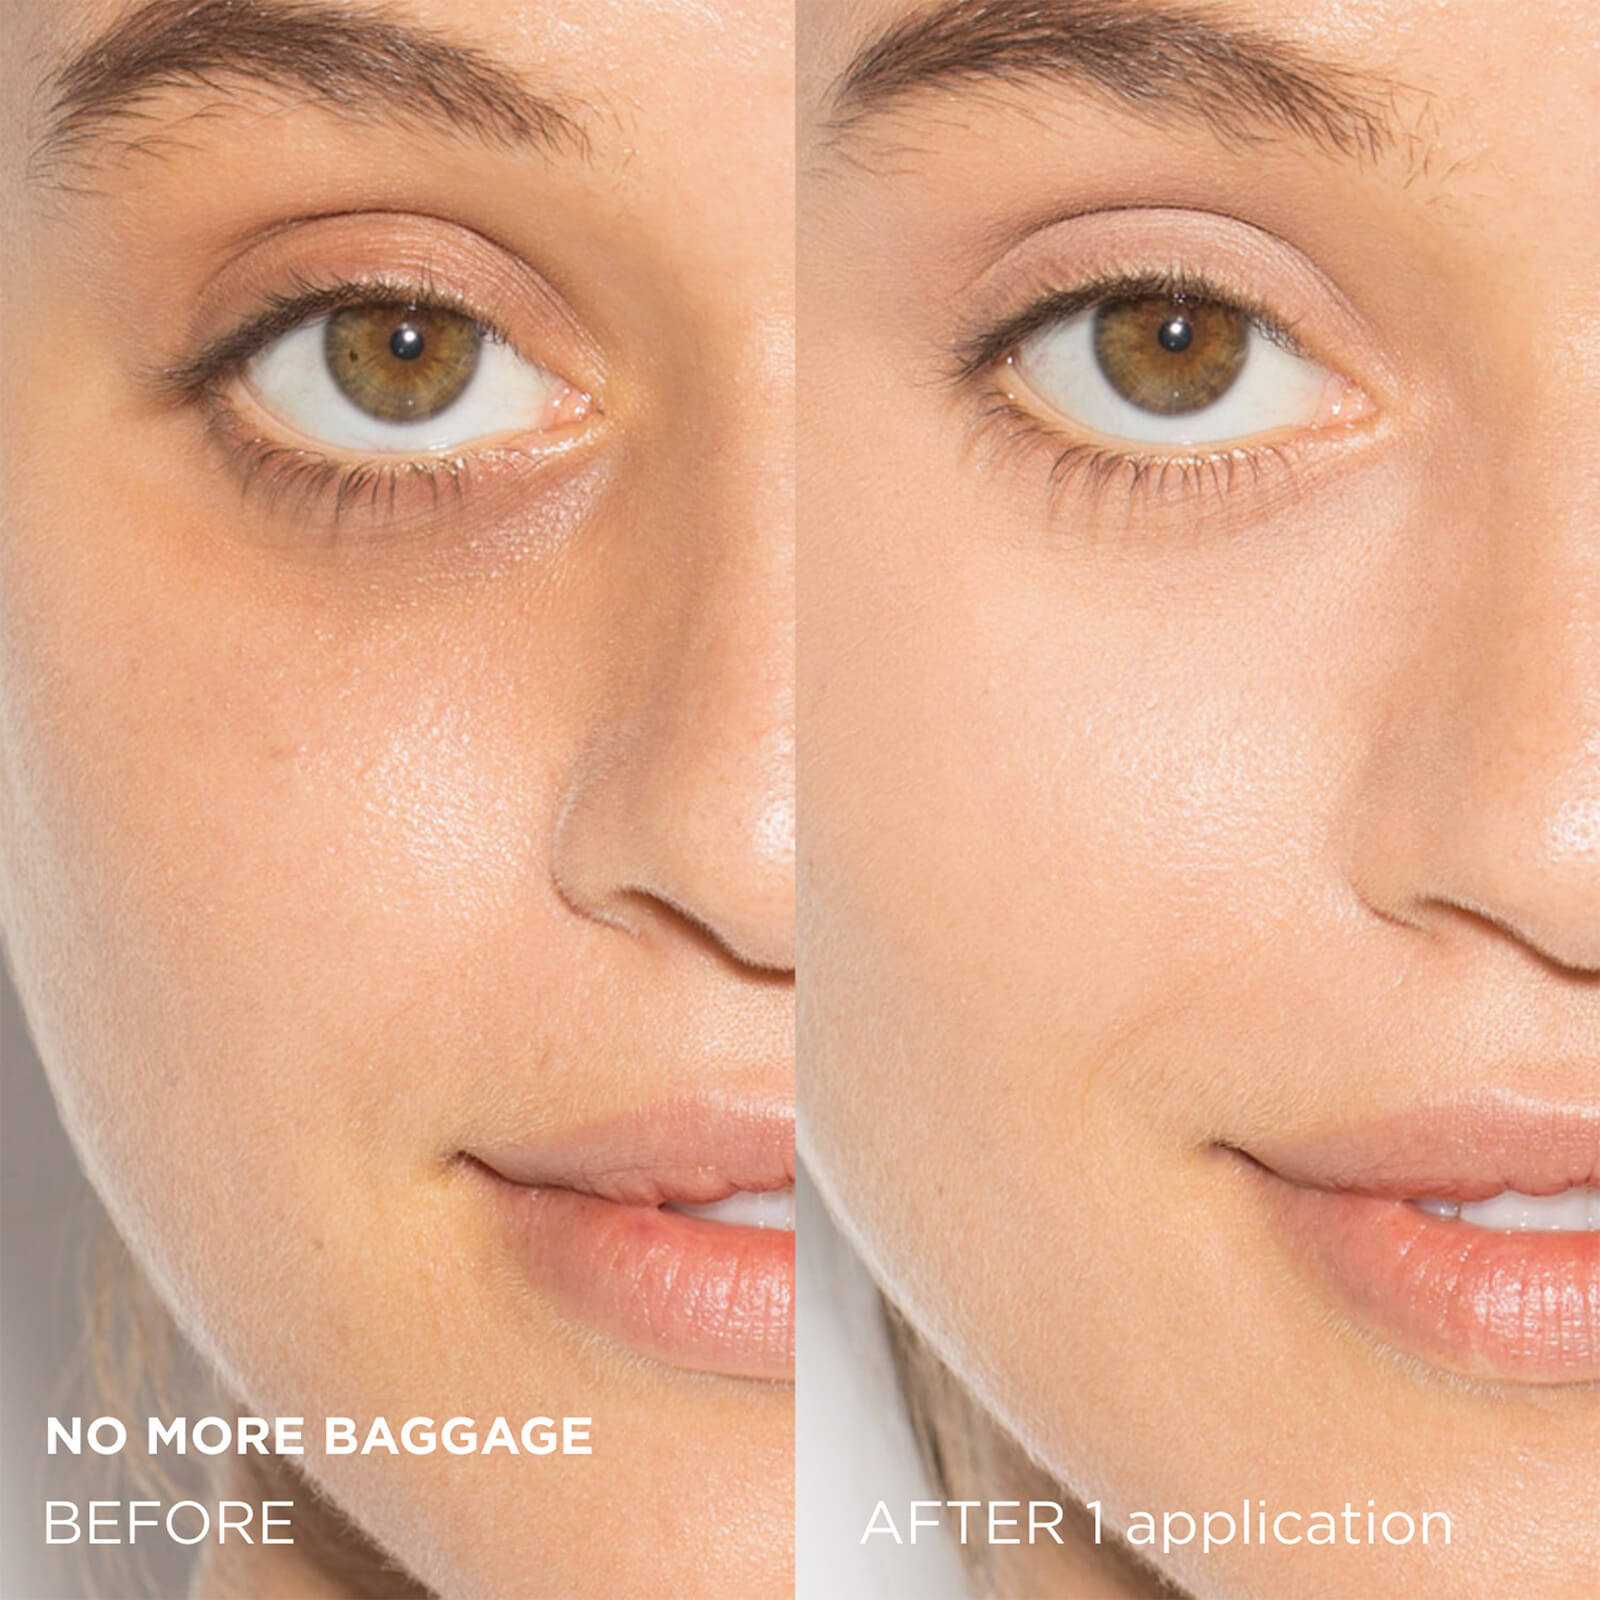 no more baggage, before. after 1 application